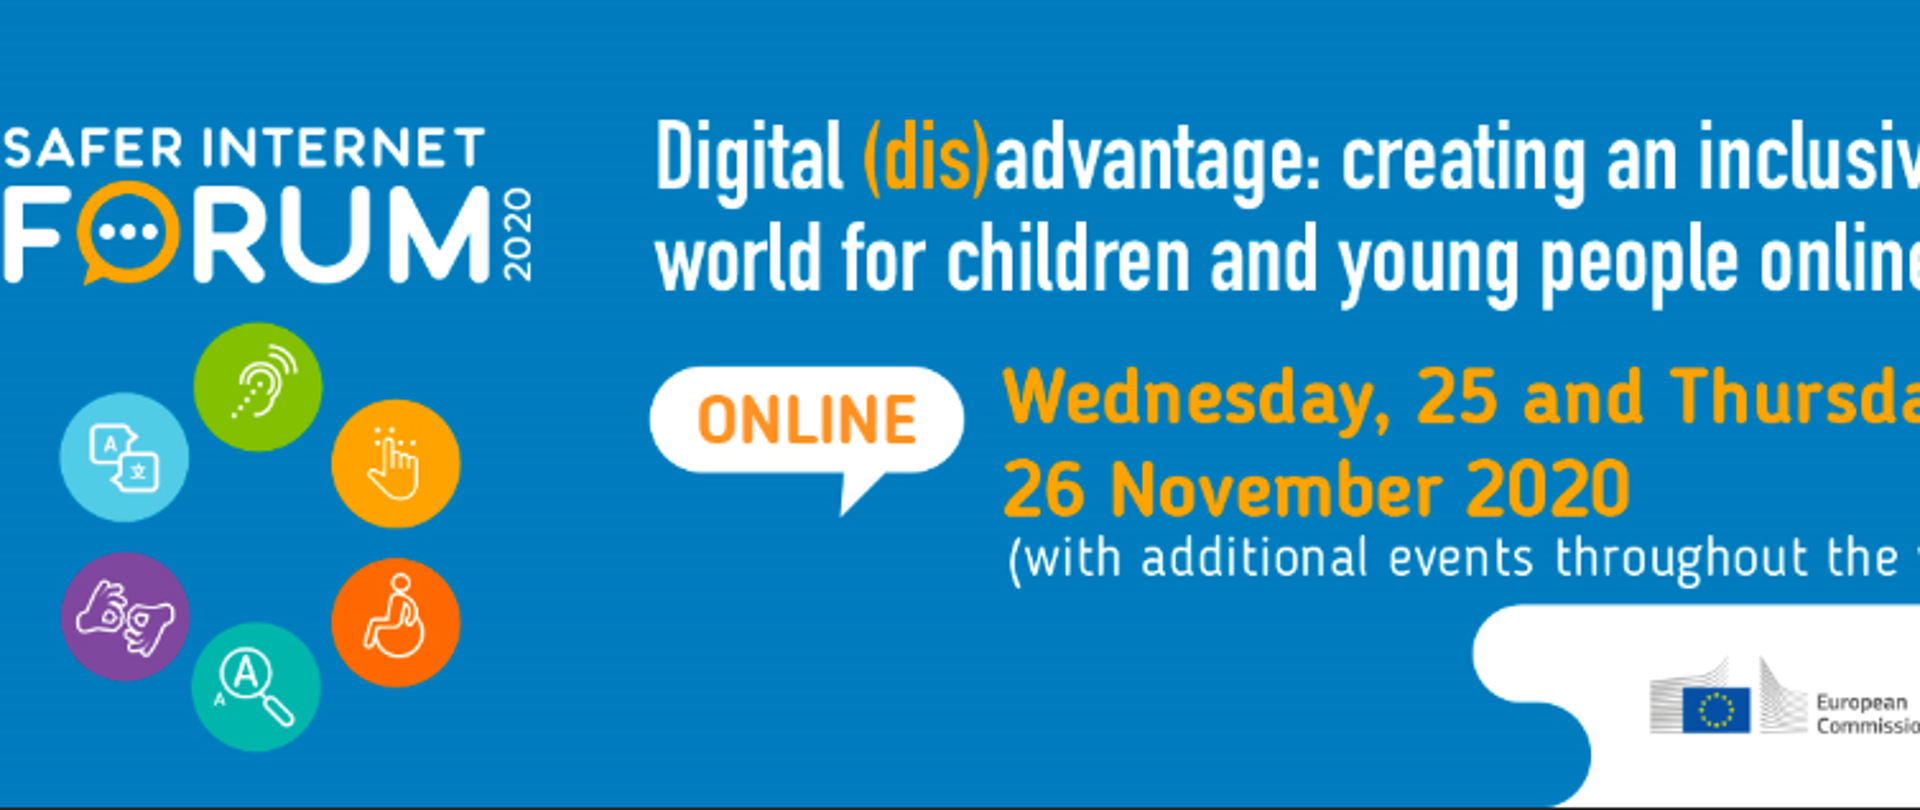 Napis na niebieskim tle Digital (dis)advantage: creating an inclusive world for children and young people online, Wednesday, 25 and Thursday 26 November 2020